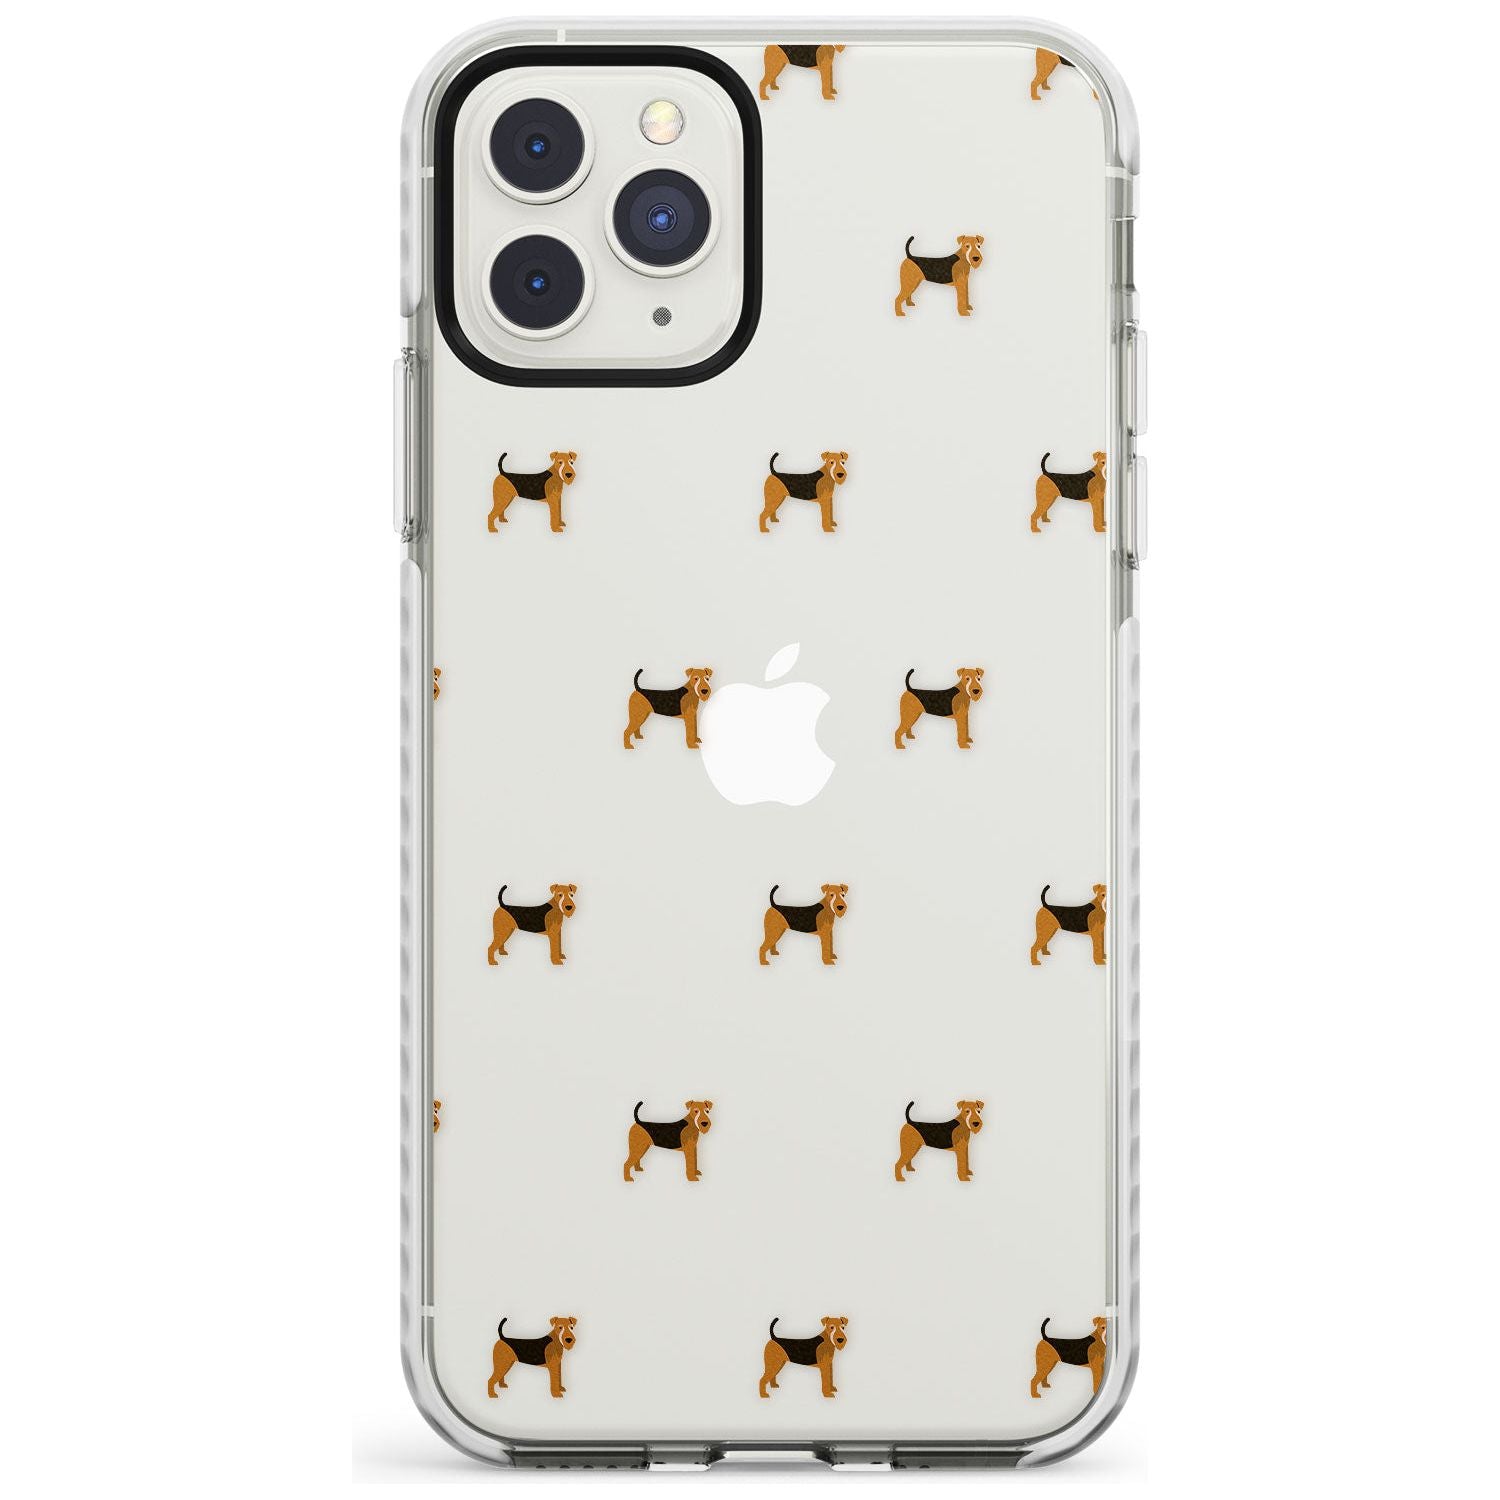 Airedale Terrier Dog Pattern Clear Impact Phone Case for iPhone 11 Pro Max